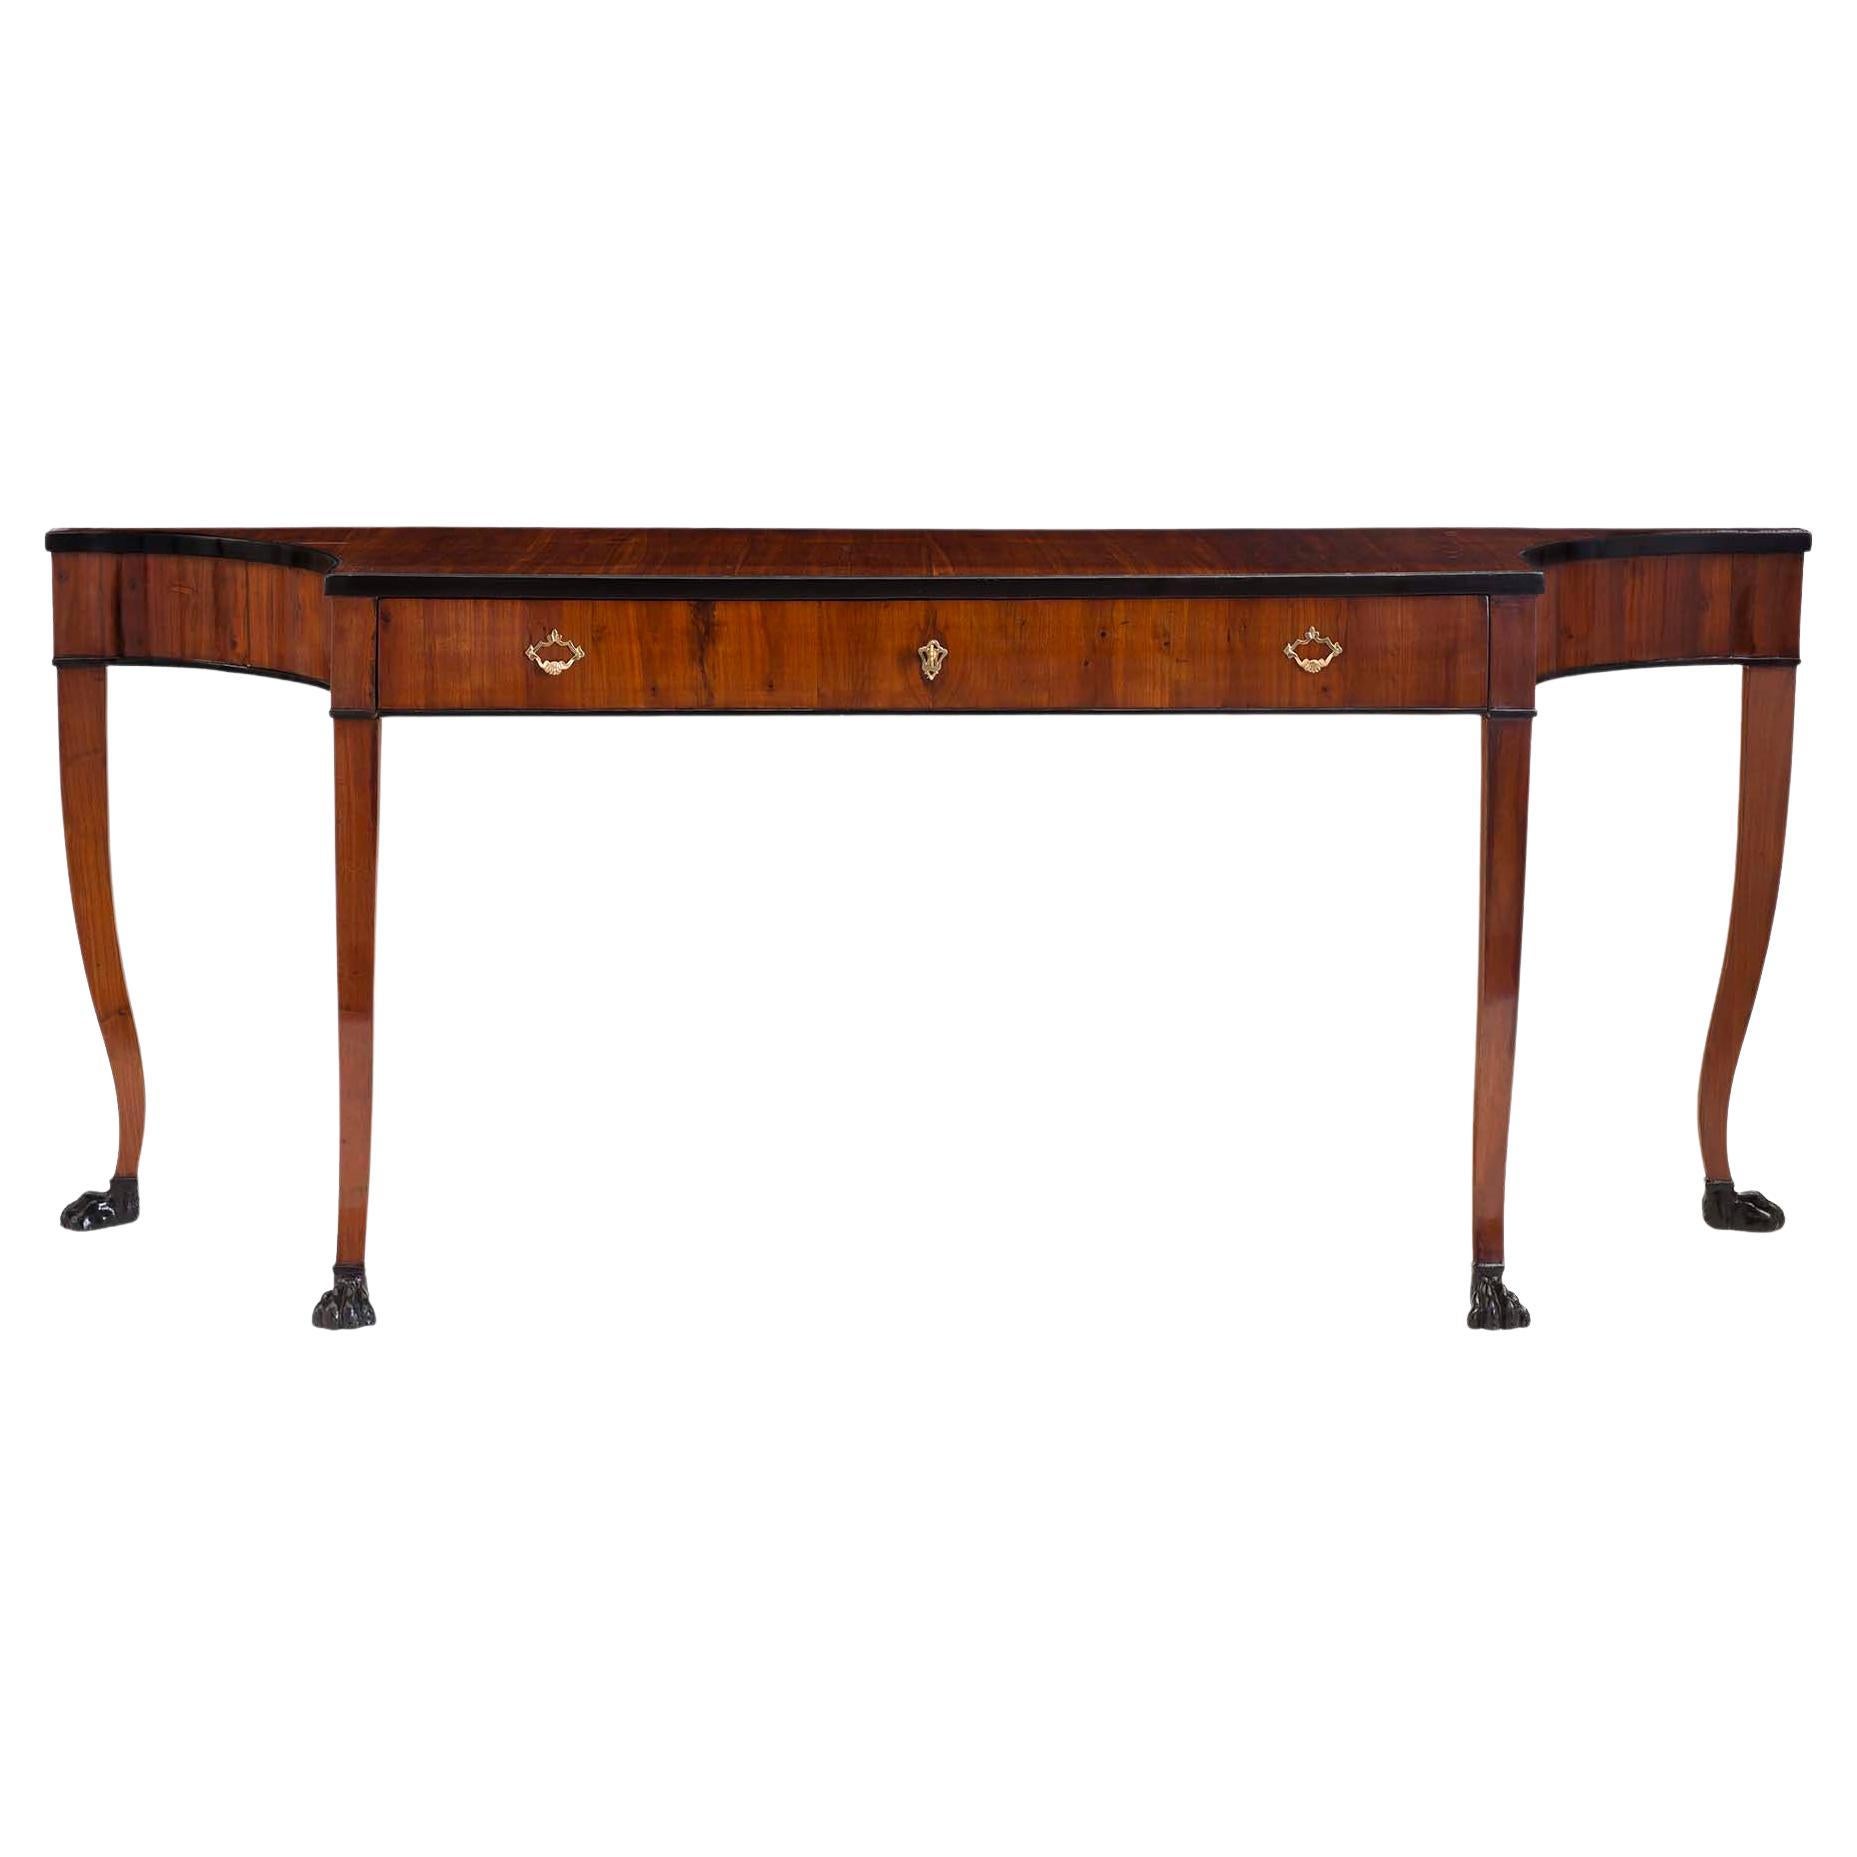 Italian Early 19th Century Neoclassical Style Mahogany and Fruitwood Console For Sale